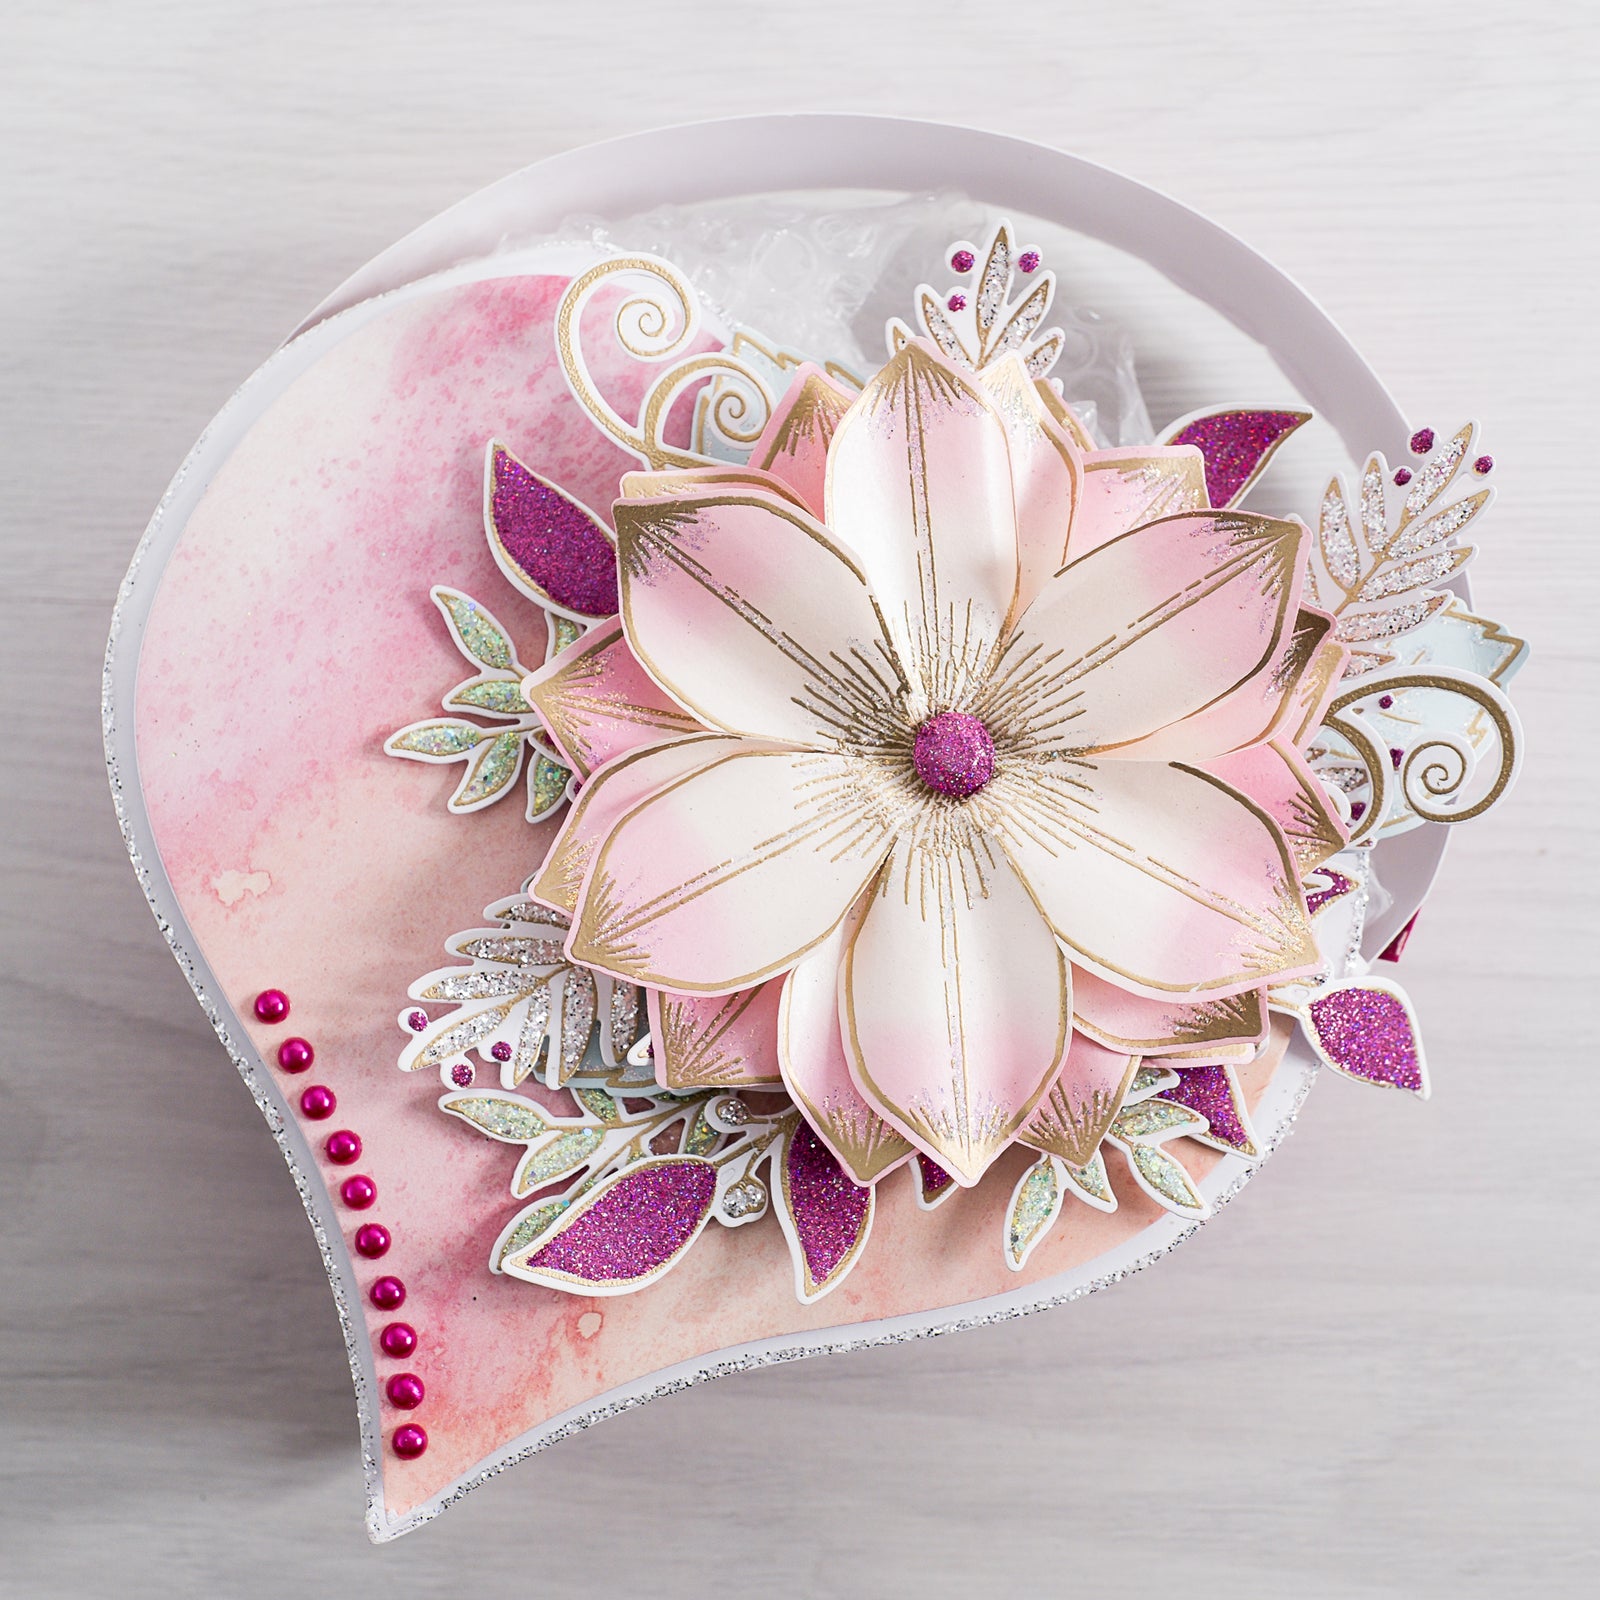 Learn how to make this beautiful pink heart-shaped bag at home using products from Chloes Creative Cards